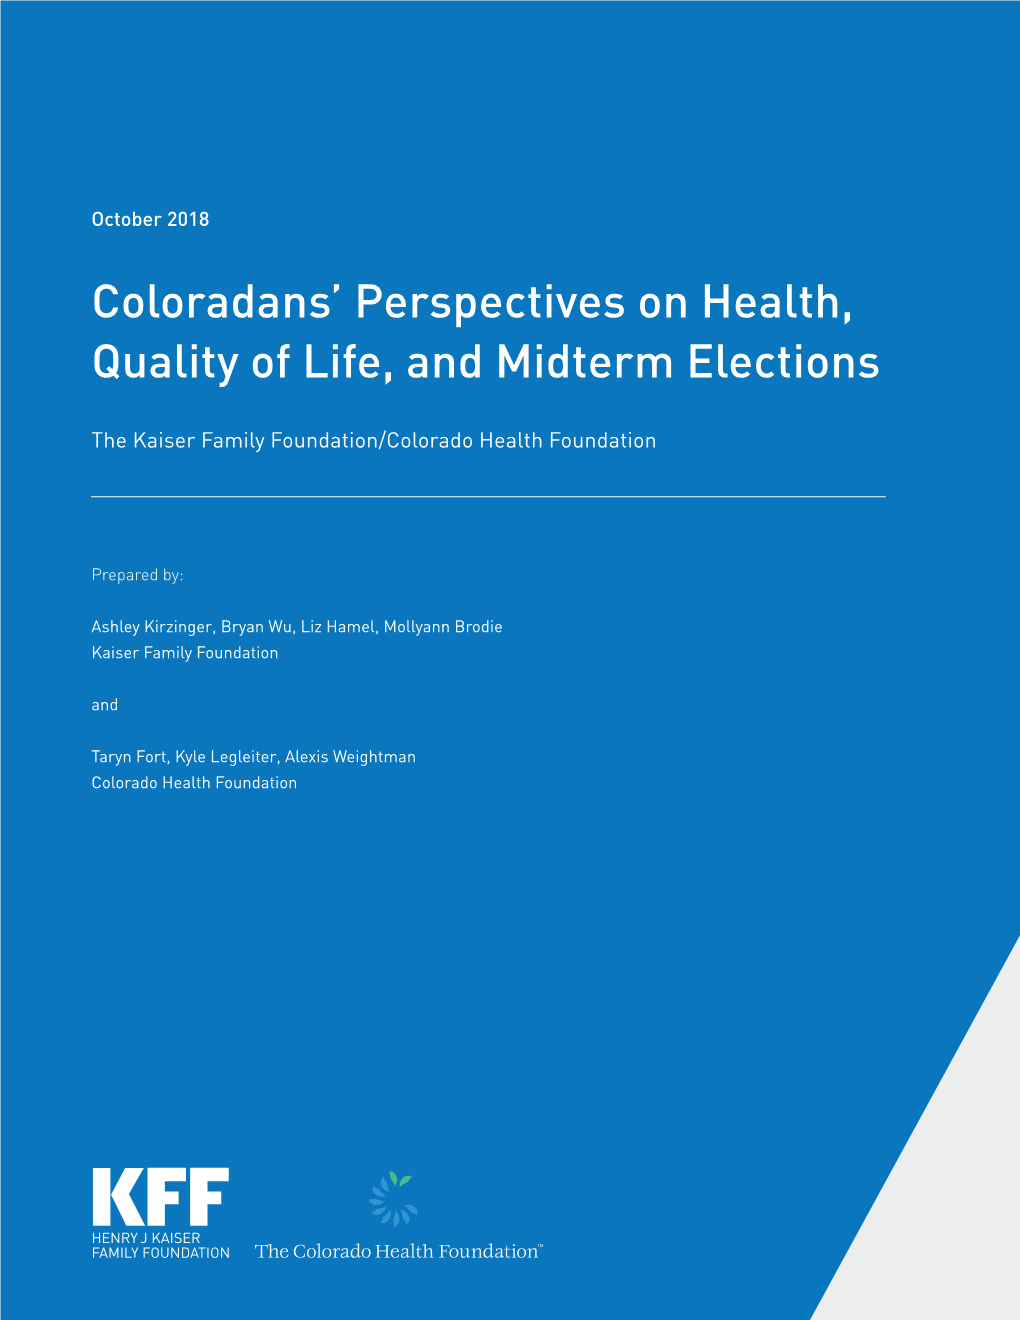 Coloradans' Perspectives on Health, Quality of Life, and Midterm Elections